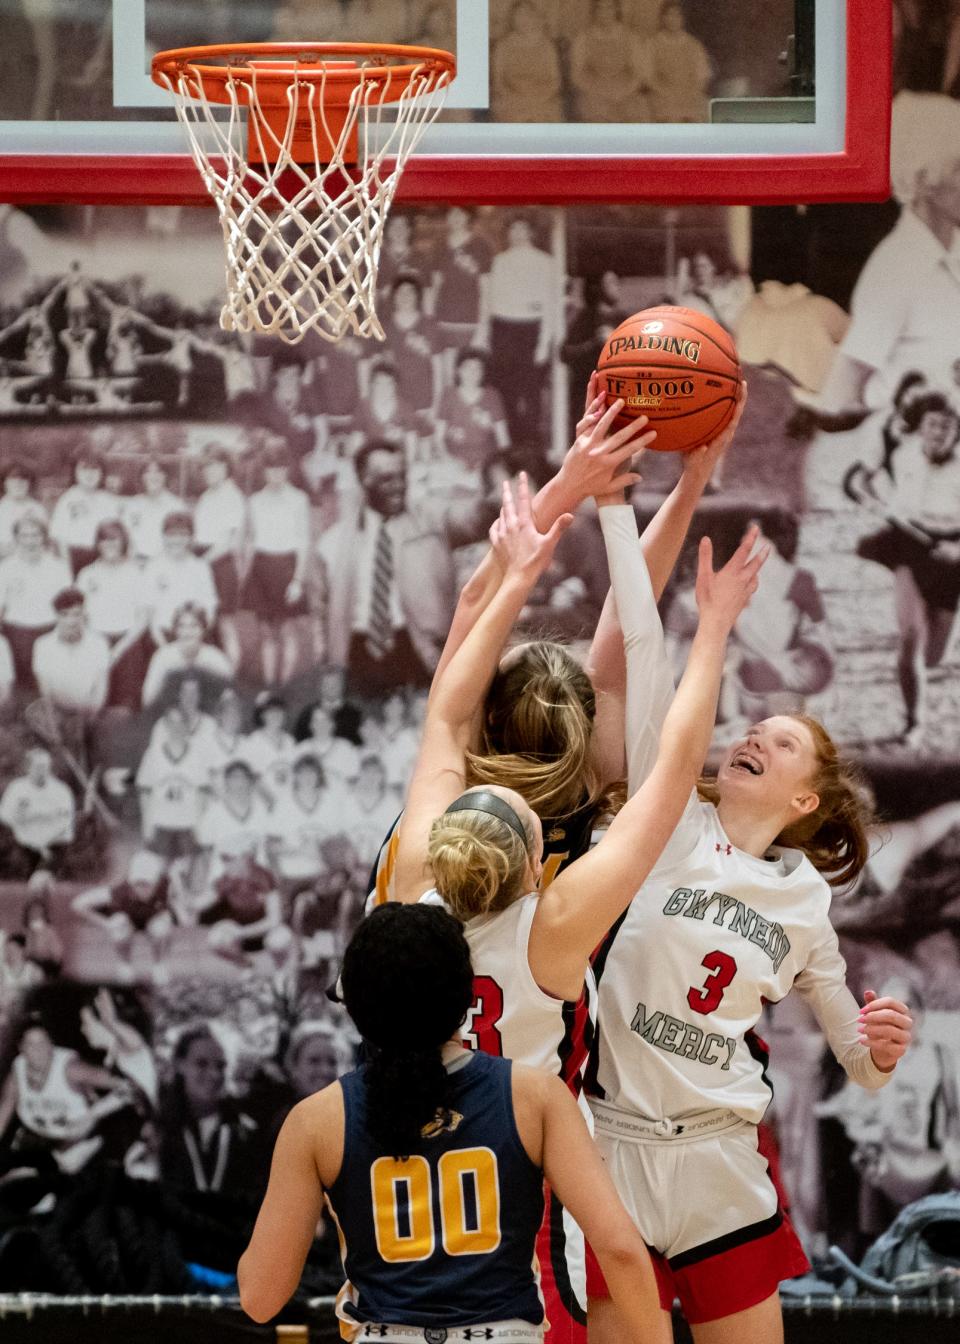 Gwynedd Mercy's Jenna Mangan, left, and Cara Lapp, right, battle New Hope-Solebury's Reagan Chrencik for a rebound in a District One Class 4A semifinal game, on Tuesday, February 22, 2022, at Gwynedd Mercy Academy High School in Lower Gwynedd. The Monarchs advance to the Class 4A final after defeating the Lions 56-28.